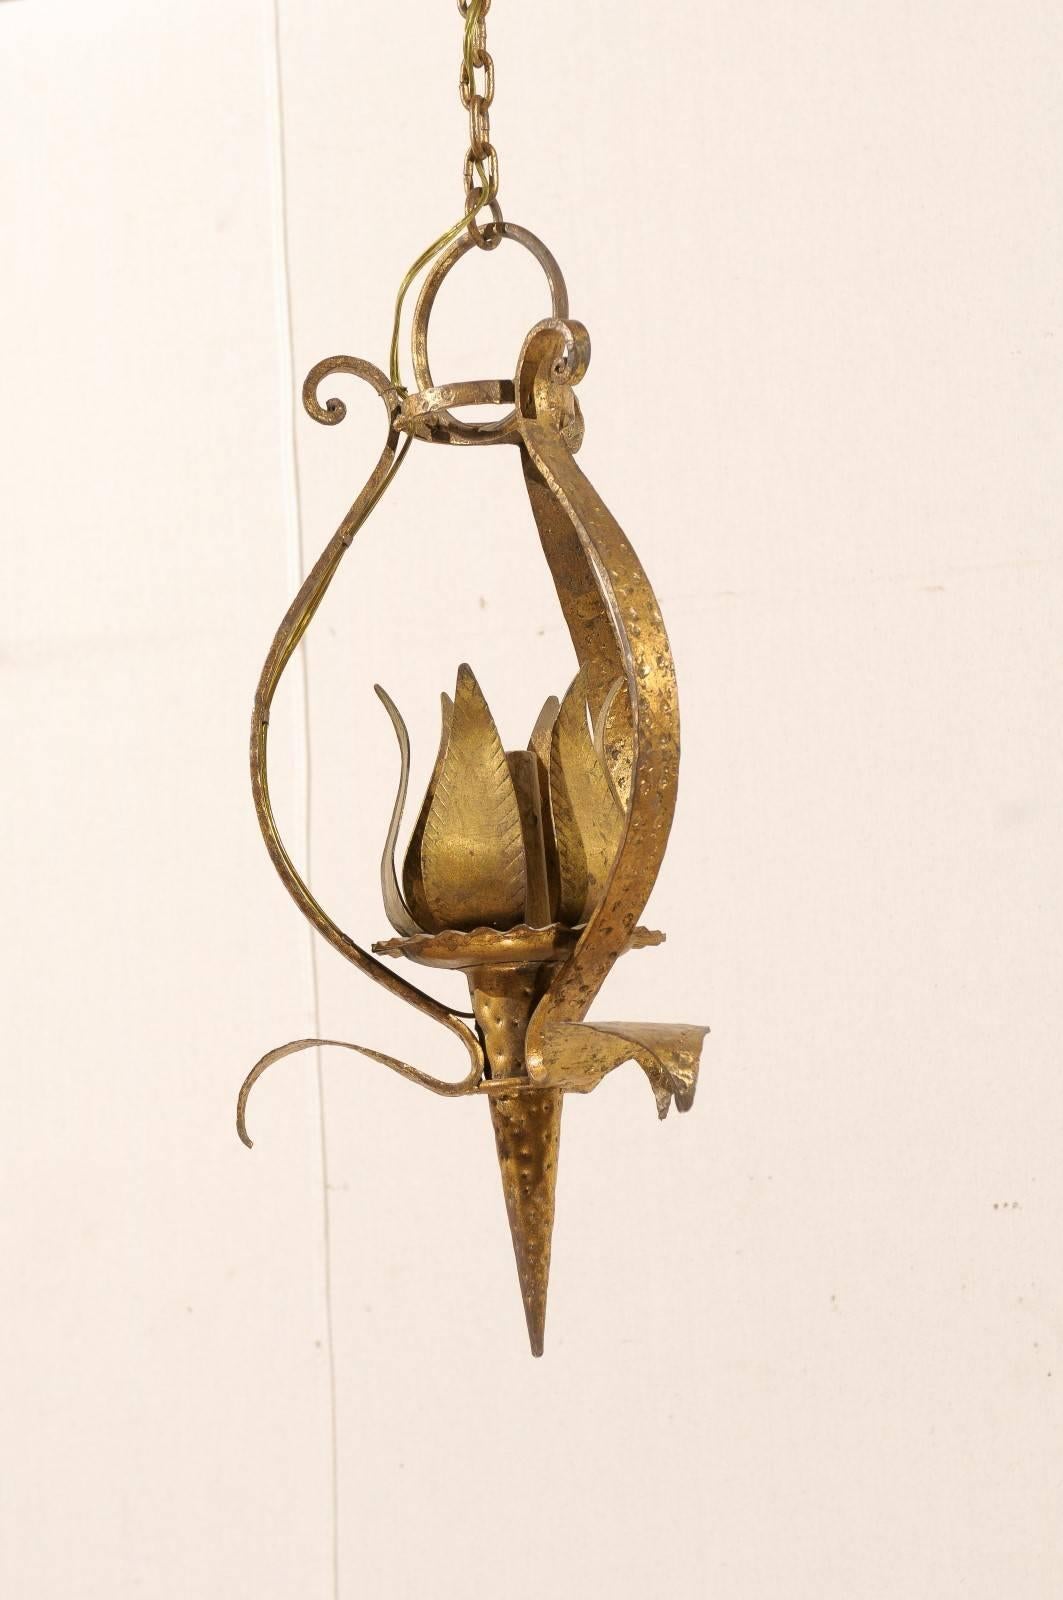 20th Century French Tulip-Shaped, Single-Light, Hammered & Gilt Metal Chandelier, Mid 20th C. For Sale